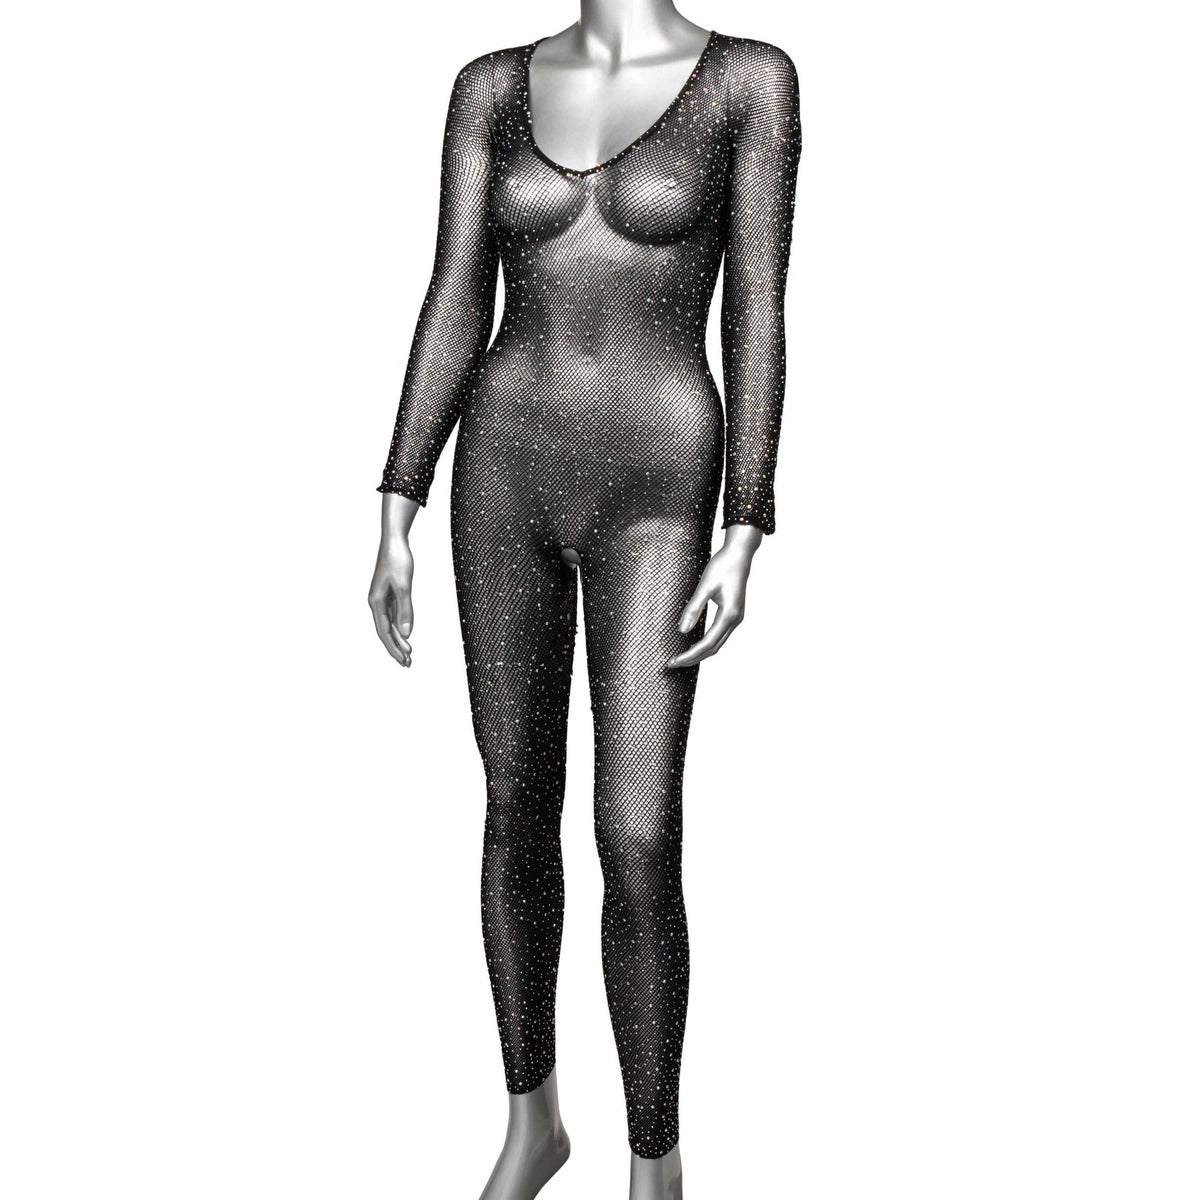 radiance crotchless full body suit one size black